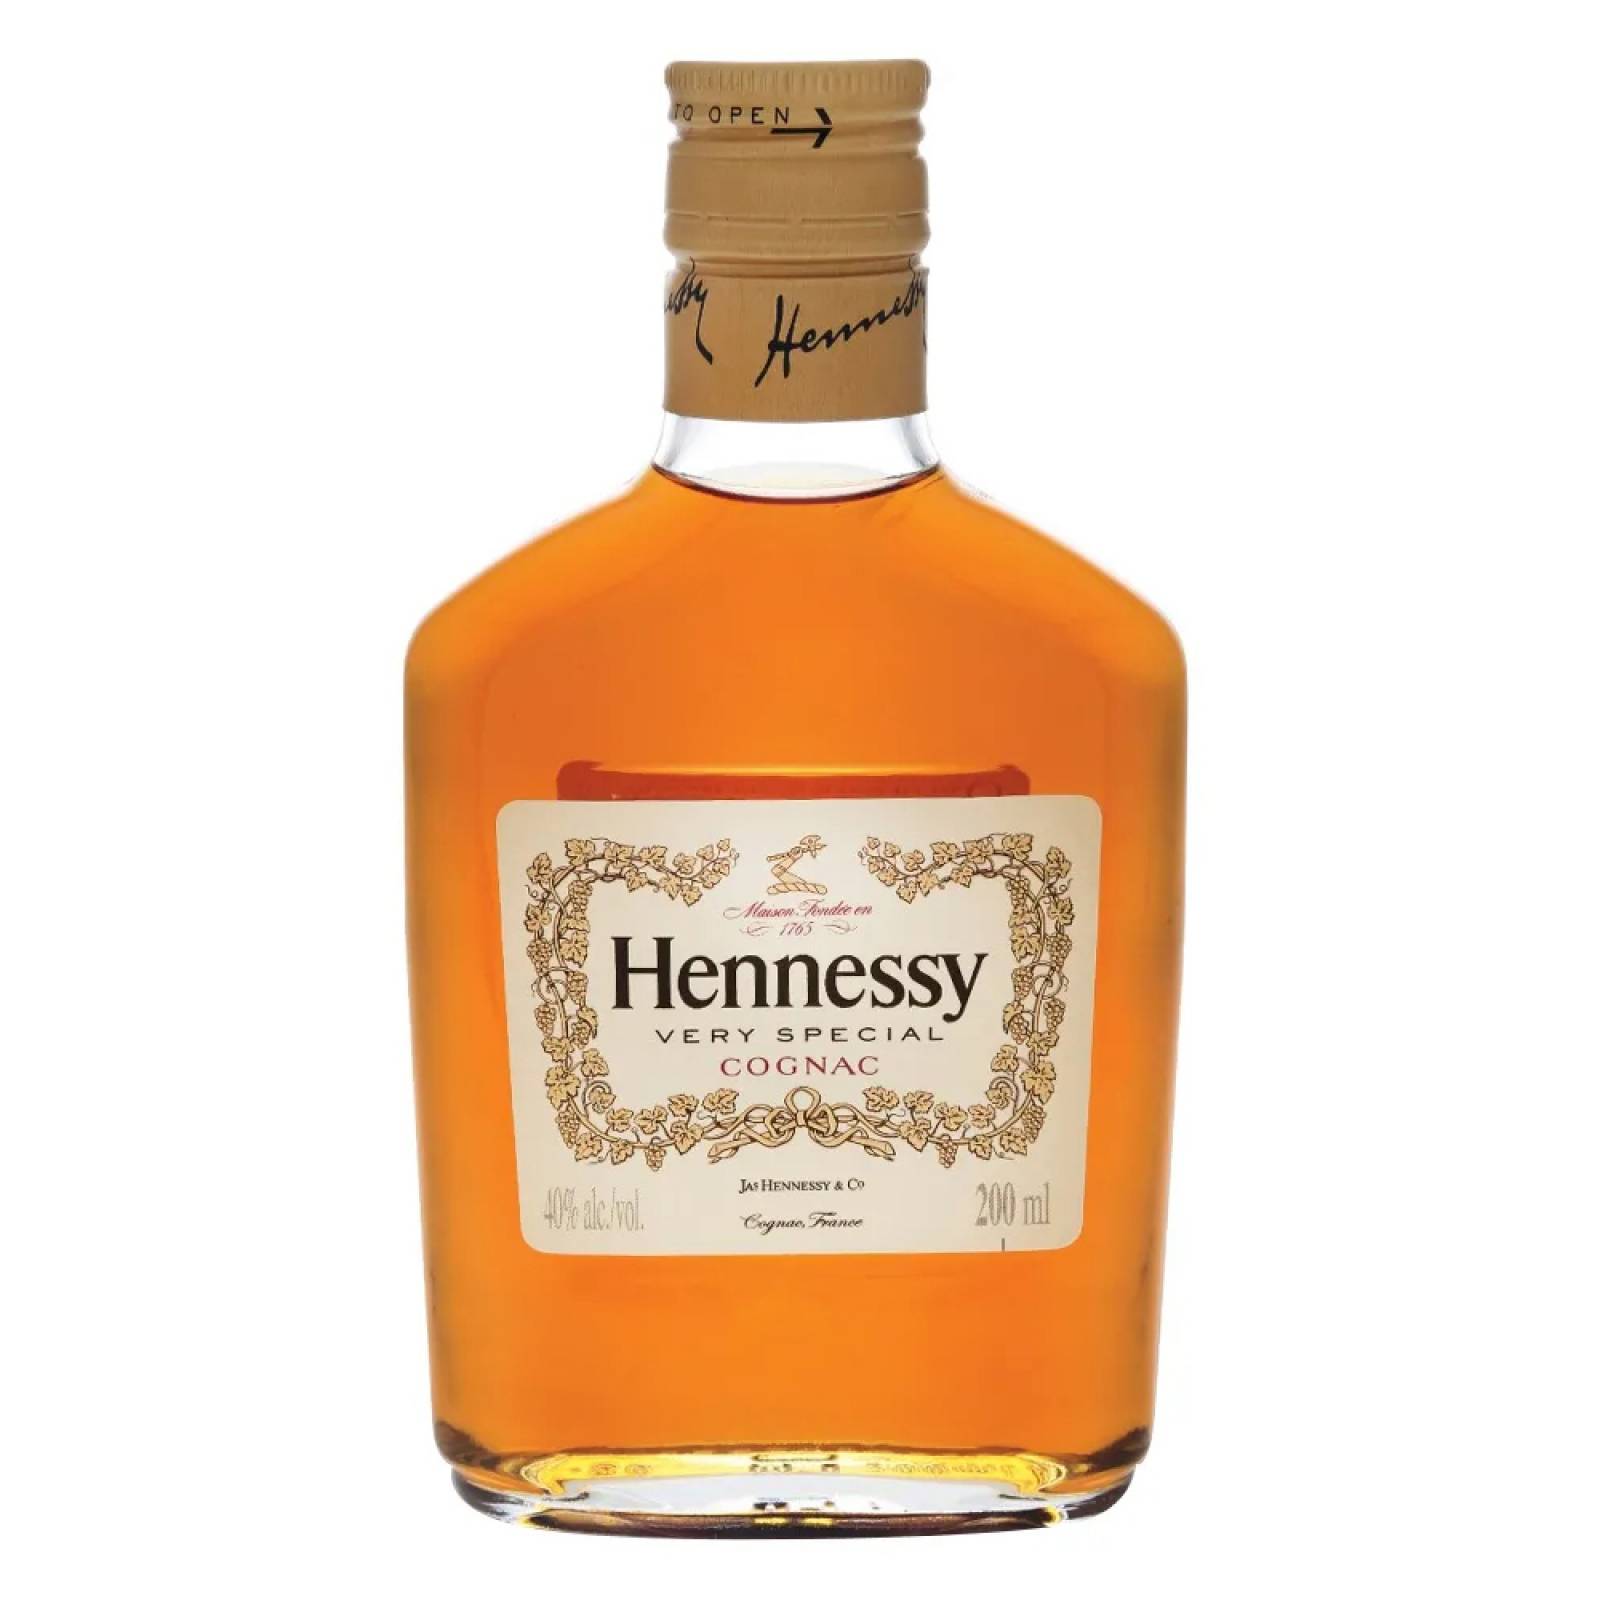 Cognac Hennessy Very Special Flask 200 ml